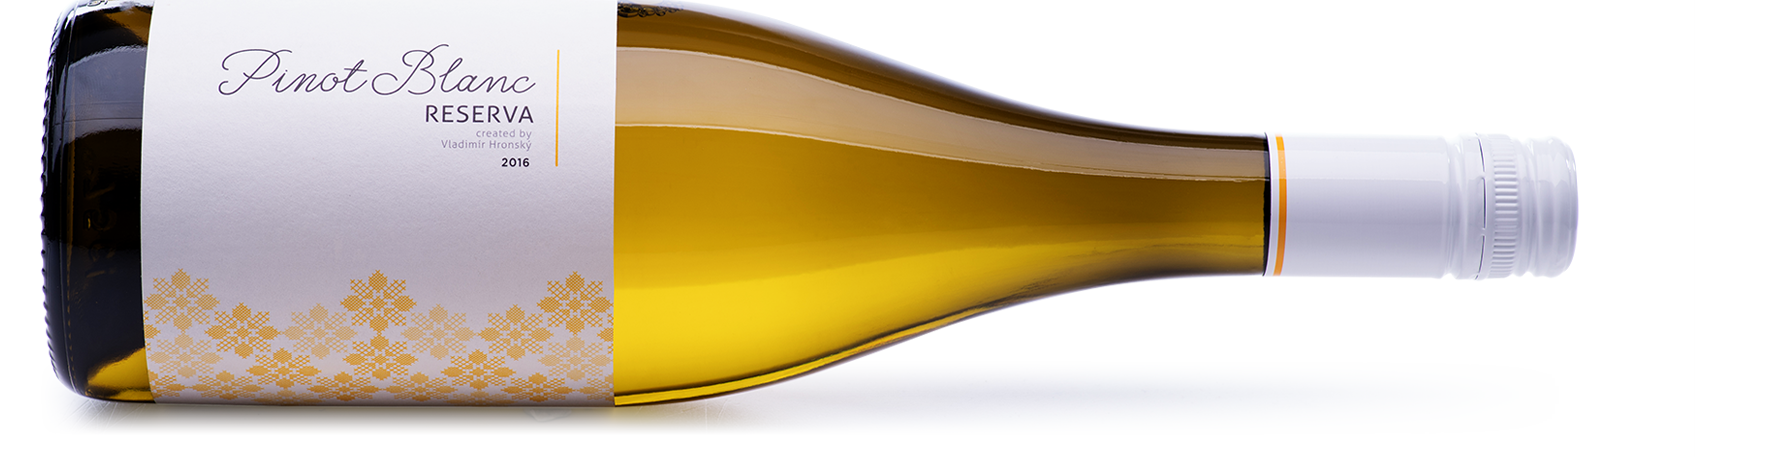 pinot_blanc_reserva_5a8064bbad2be.png